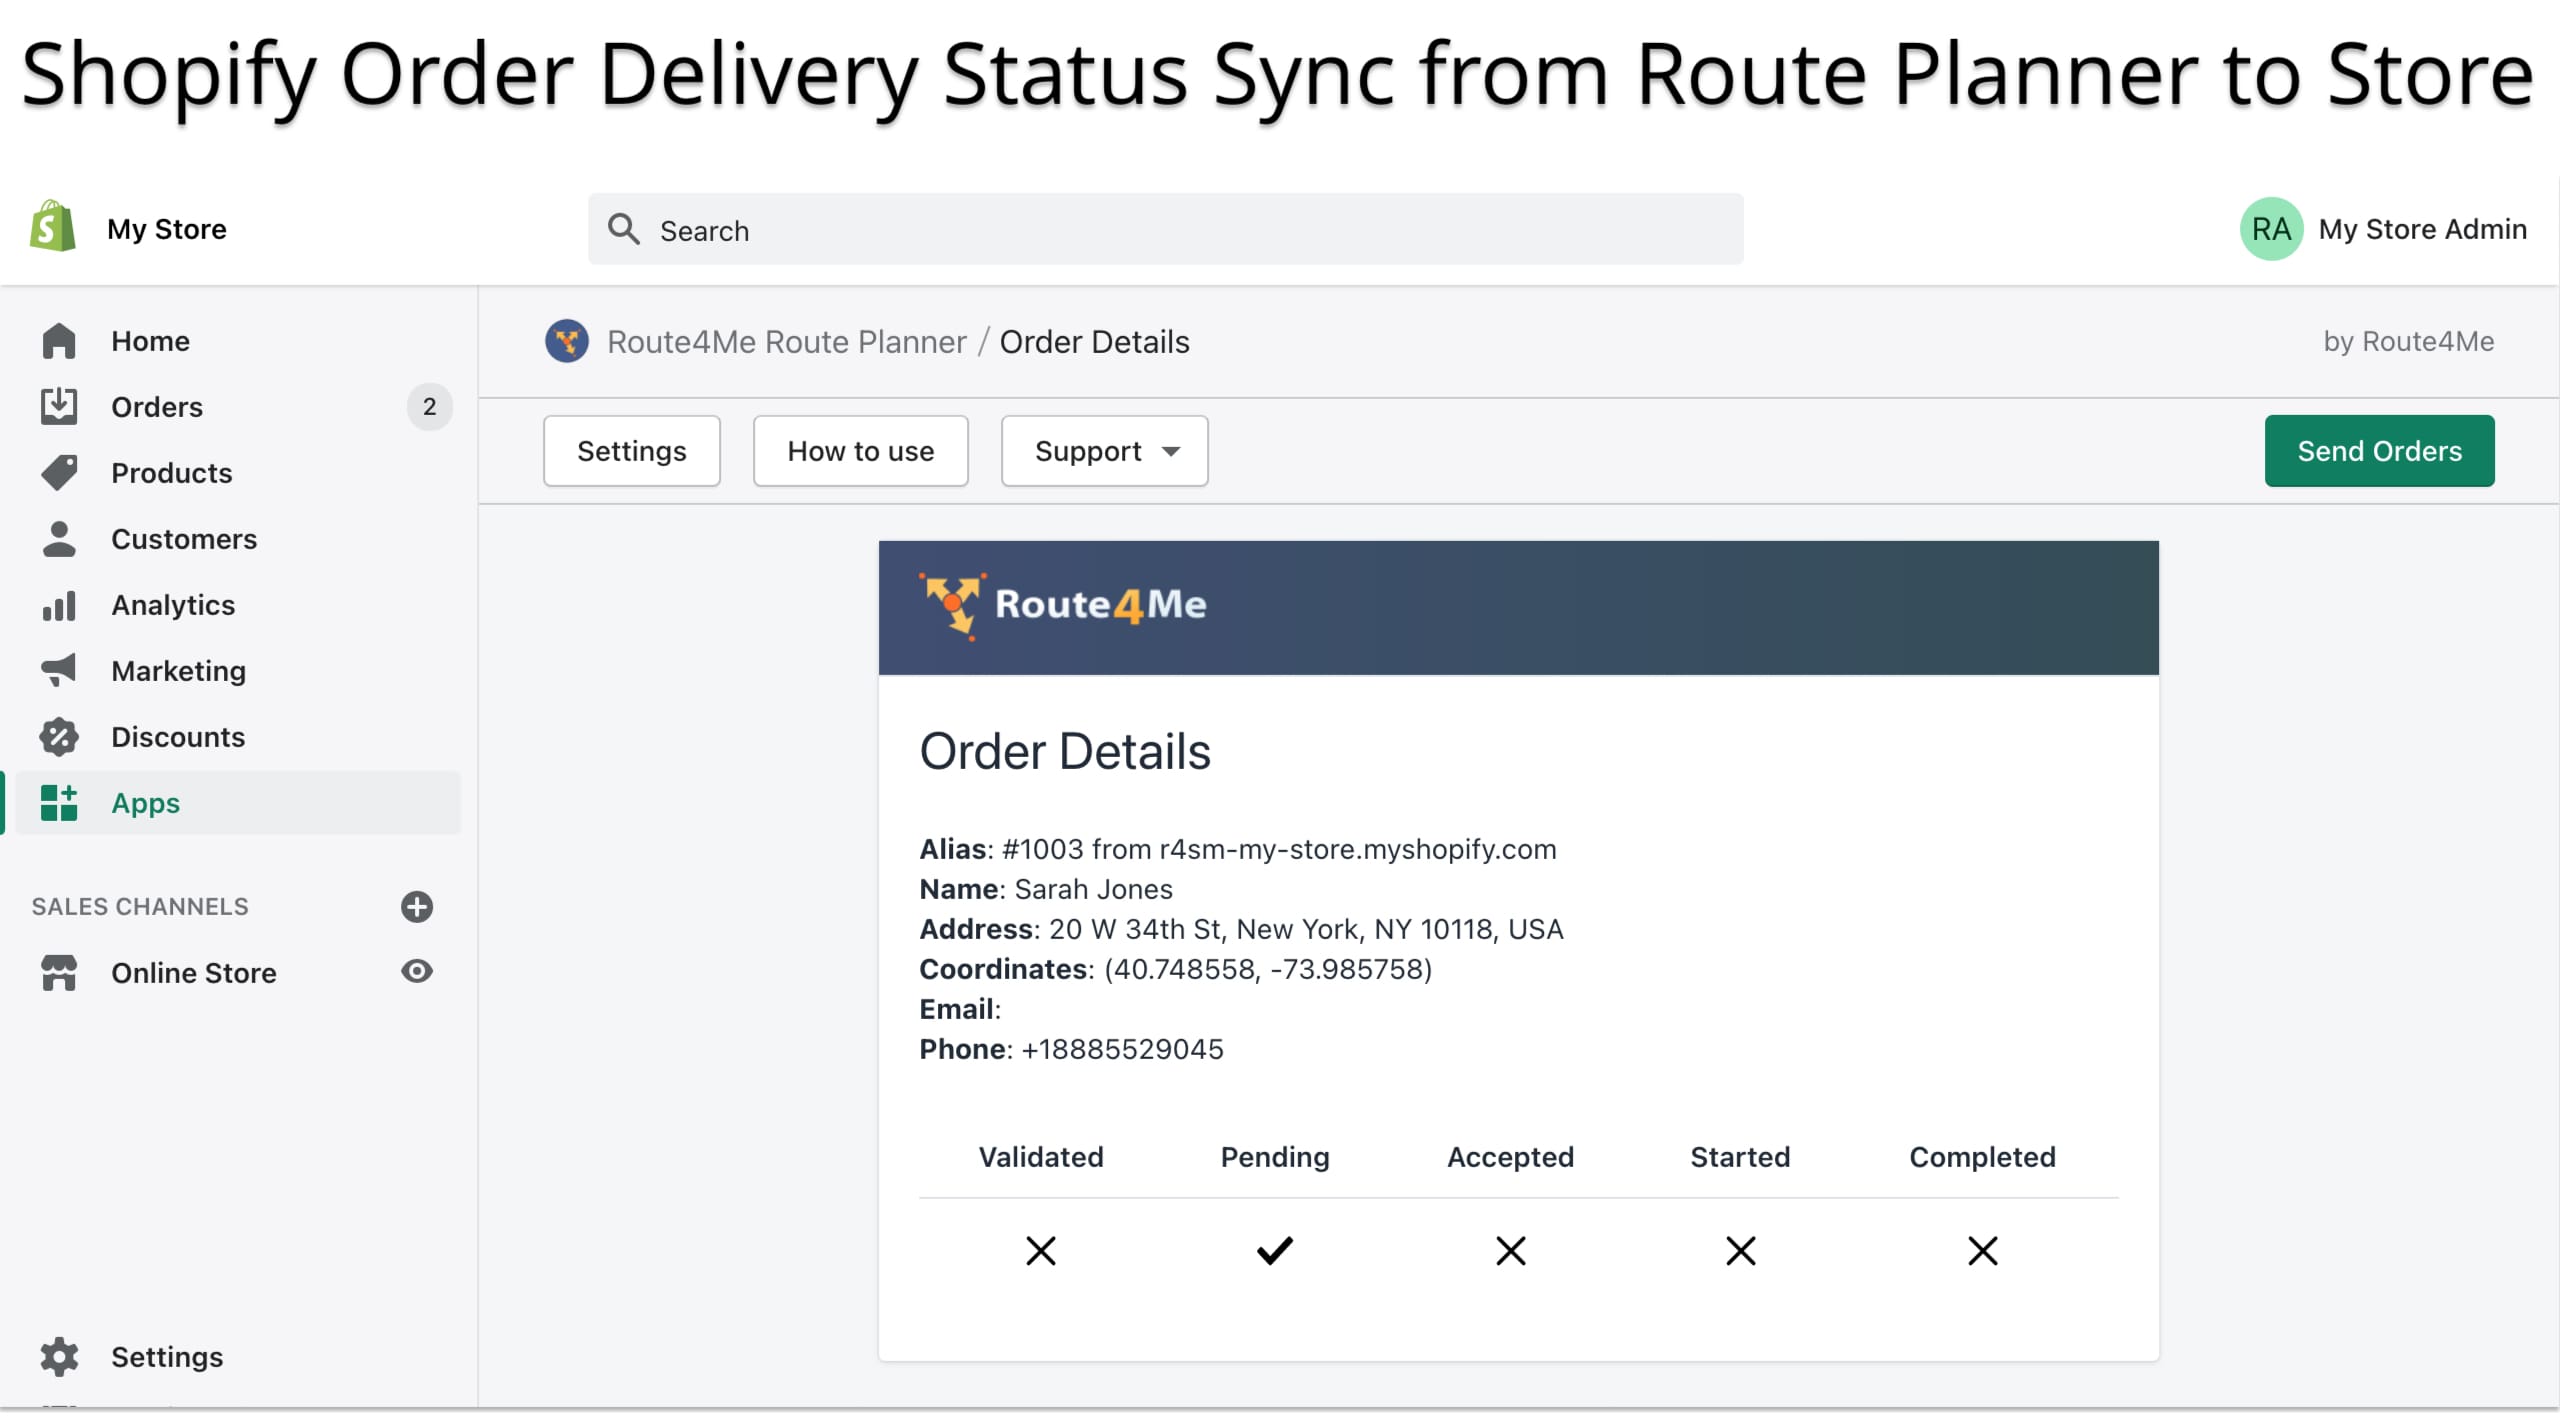 Shopify order delivery statuses synchronized with the route planner for the local delivery app.